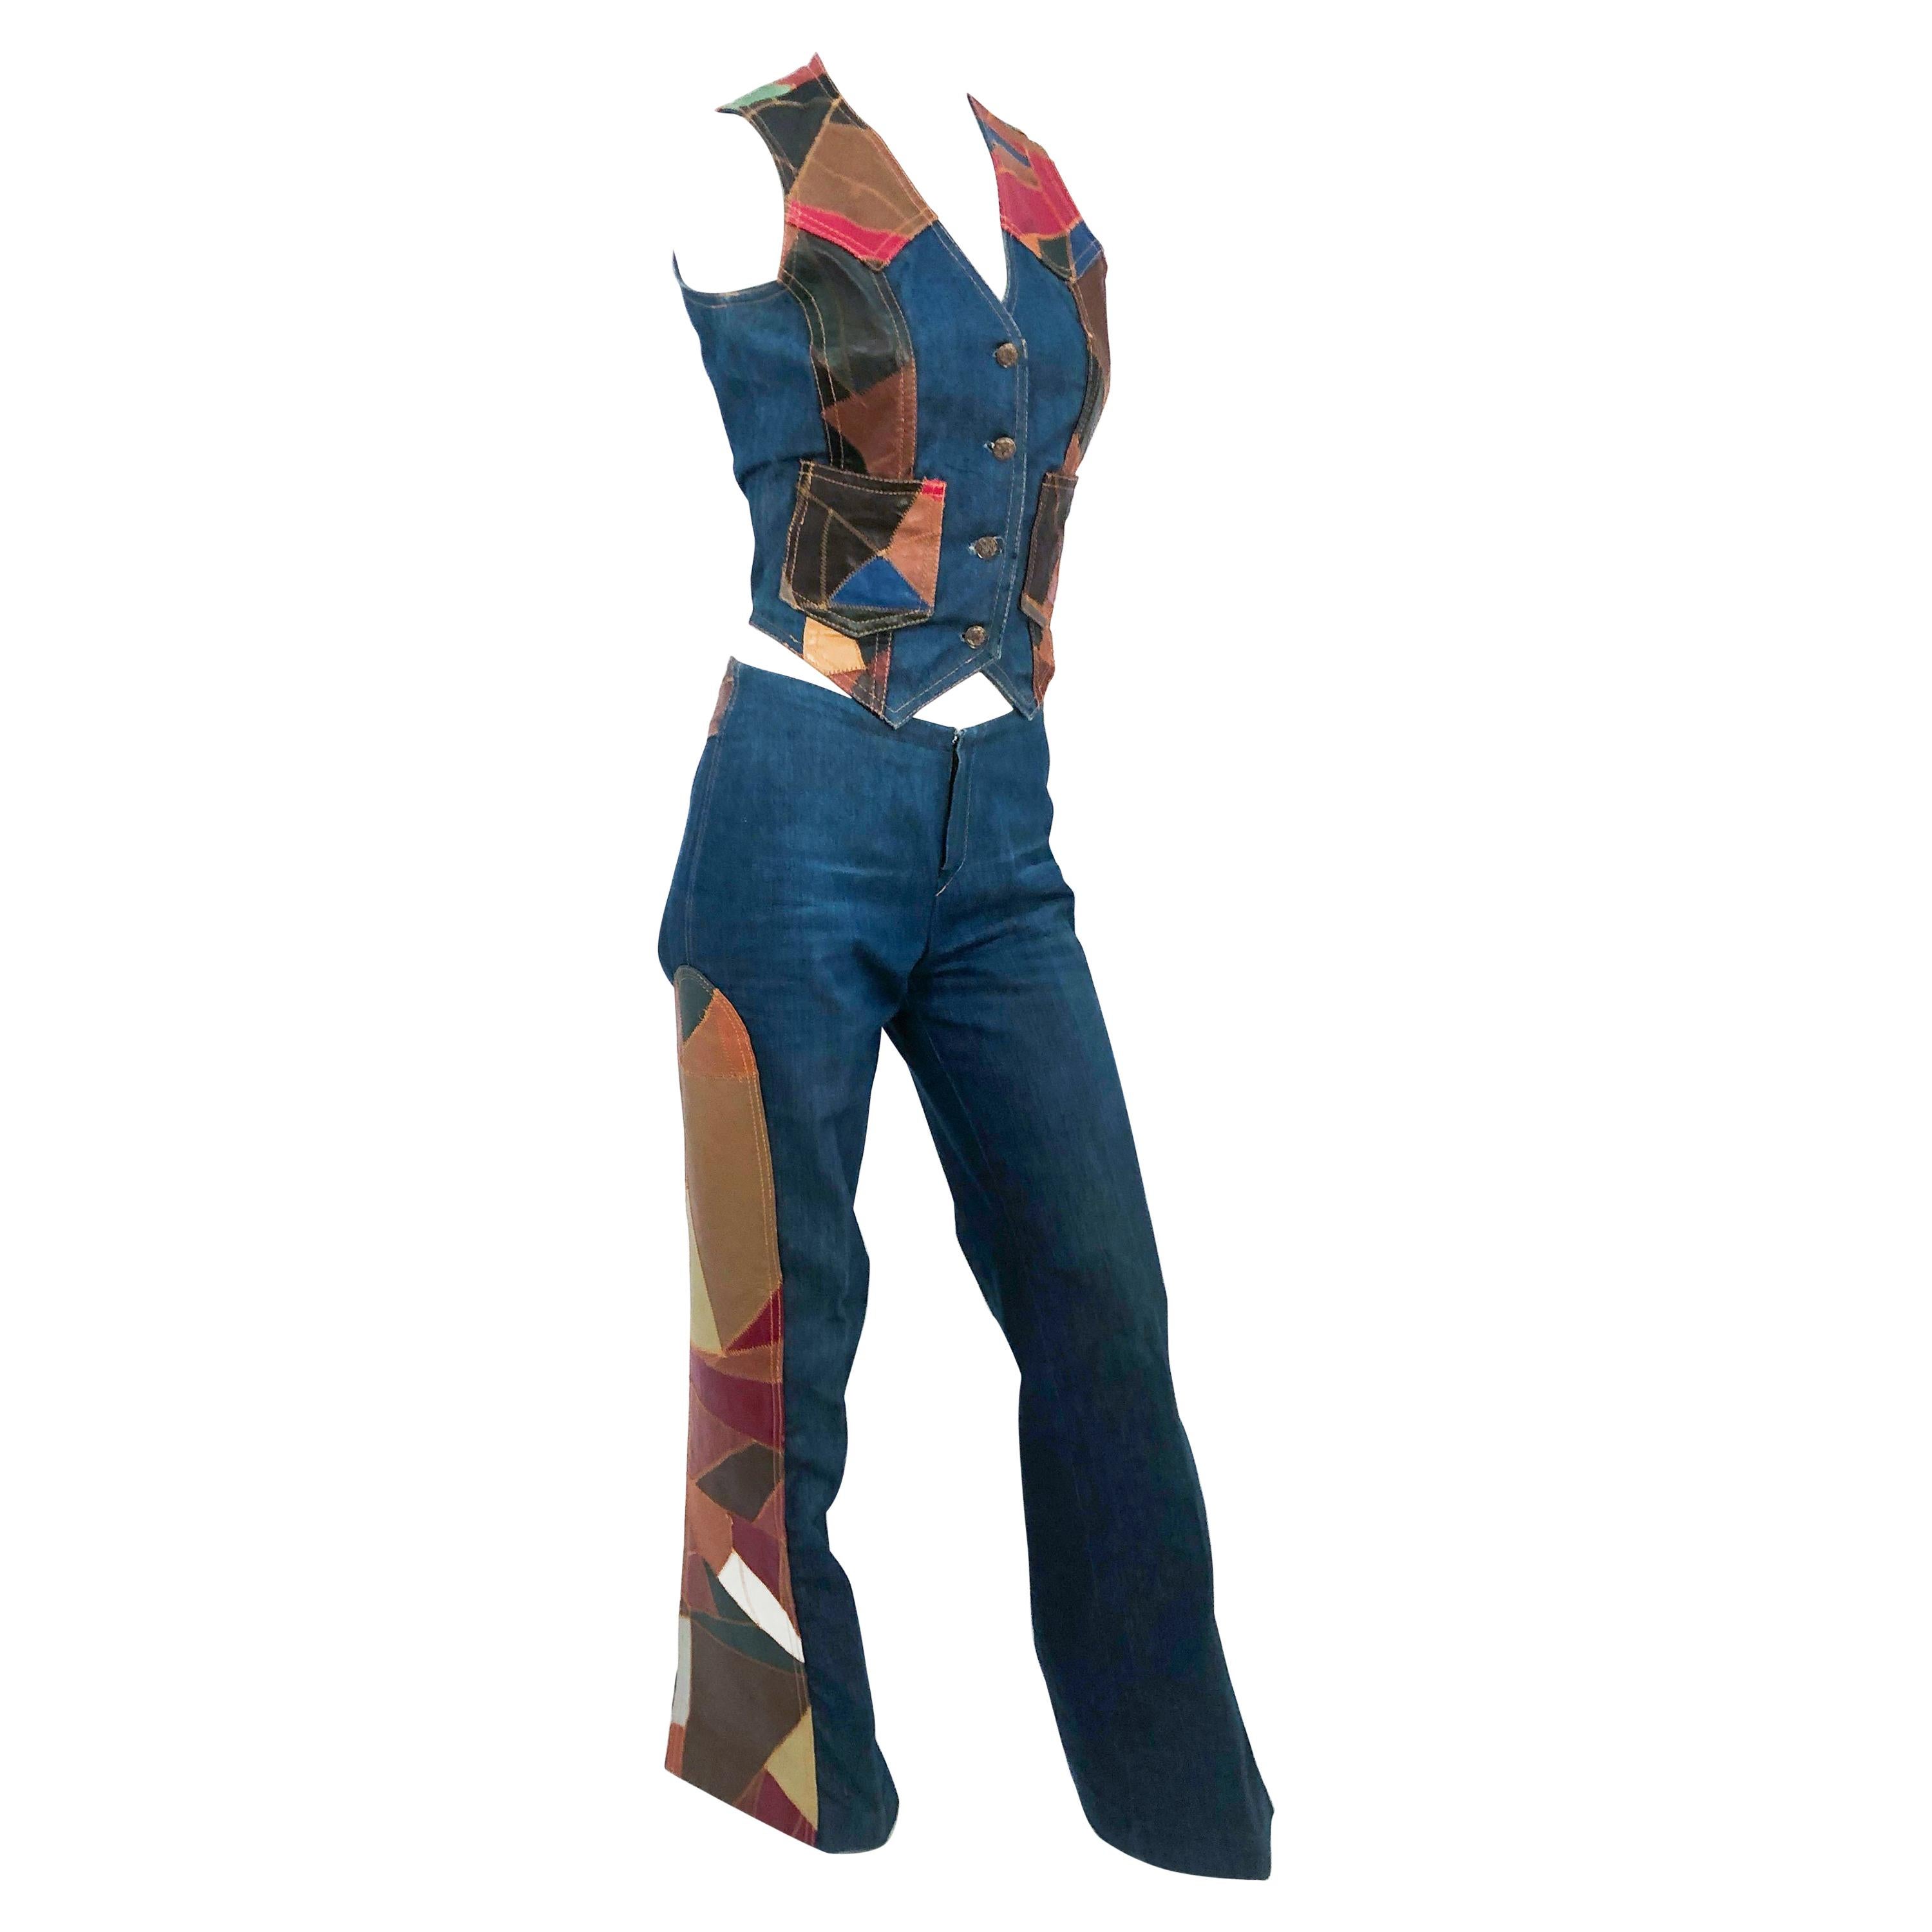 1970s Denim Set Featuring Multicolored Patch Work